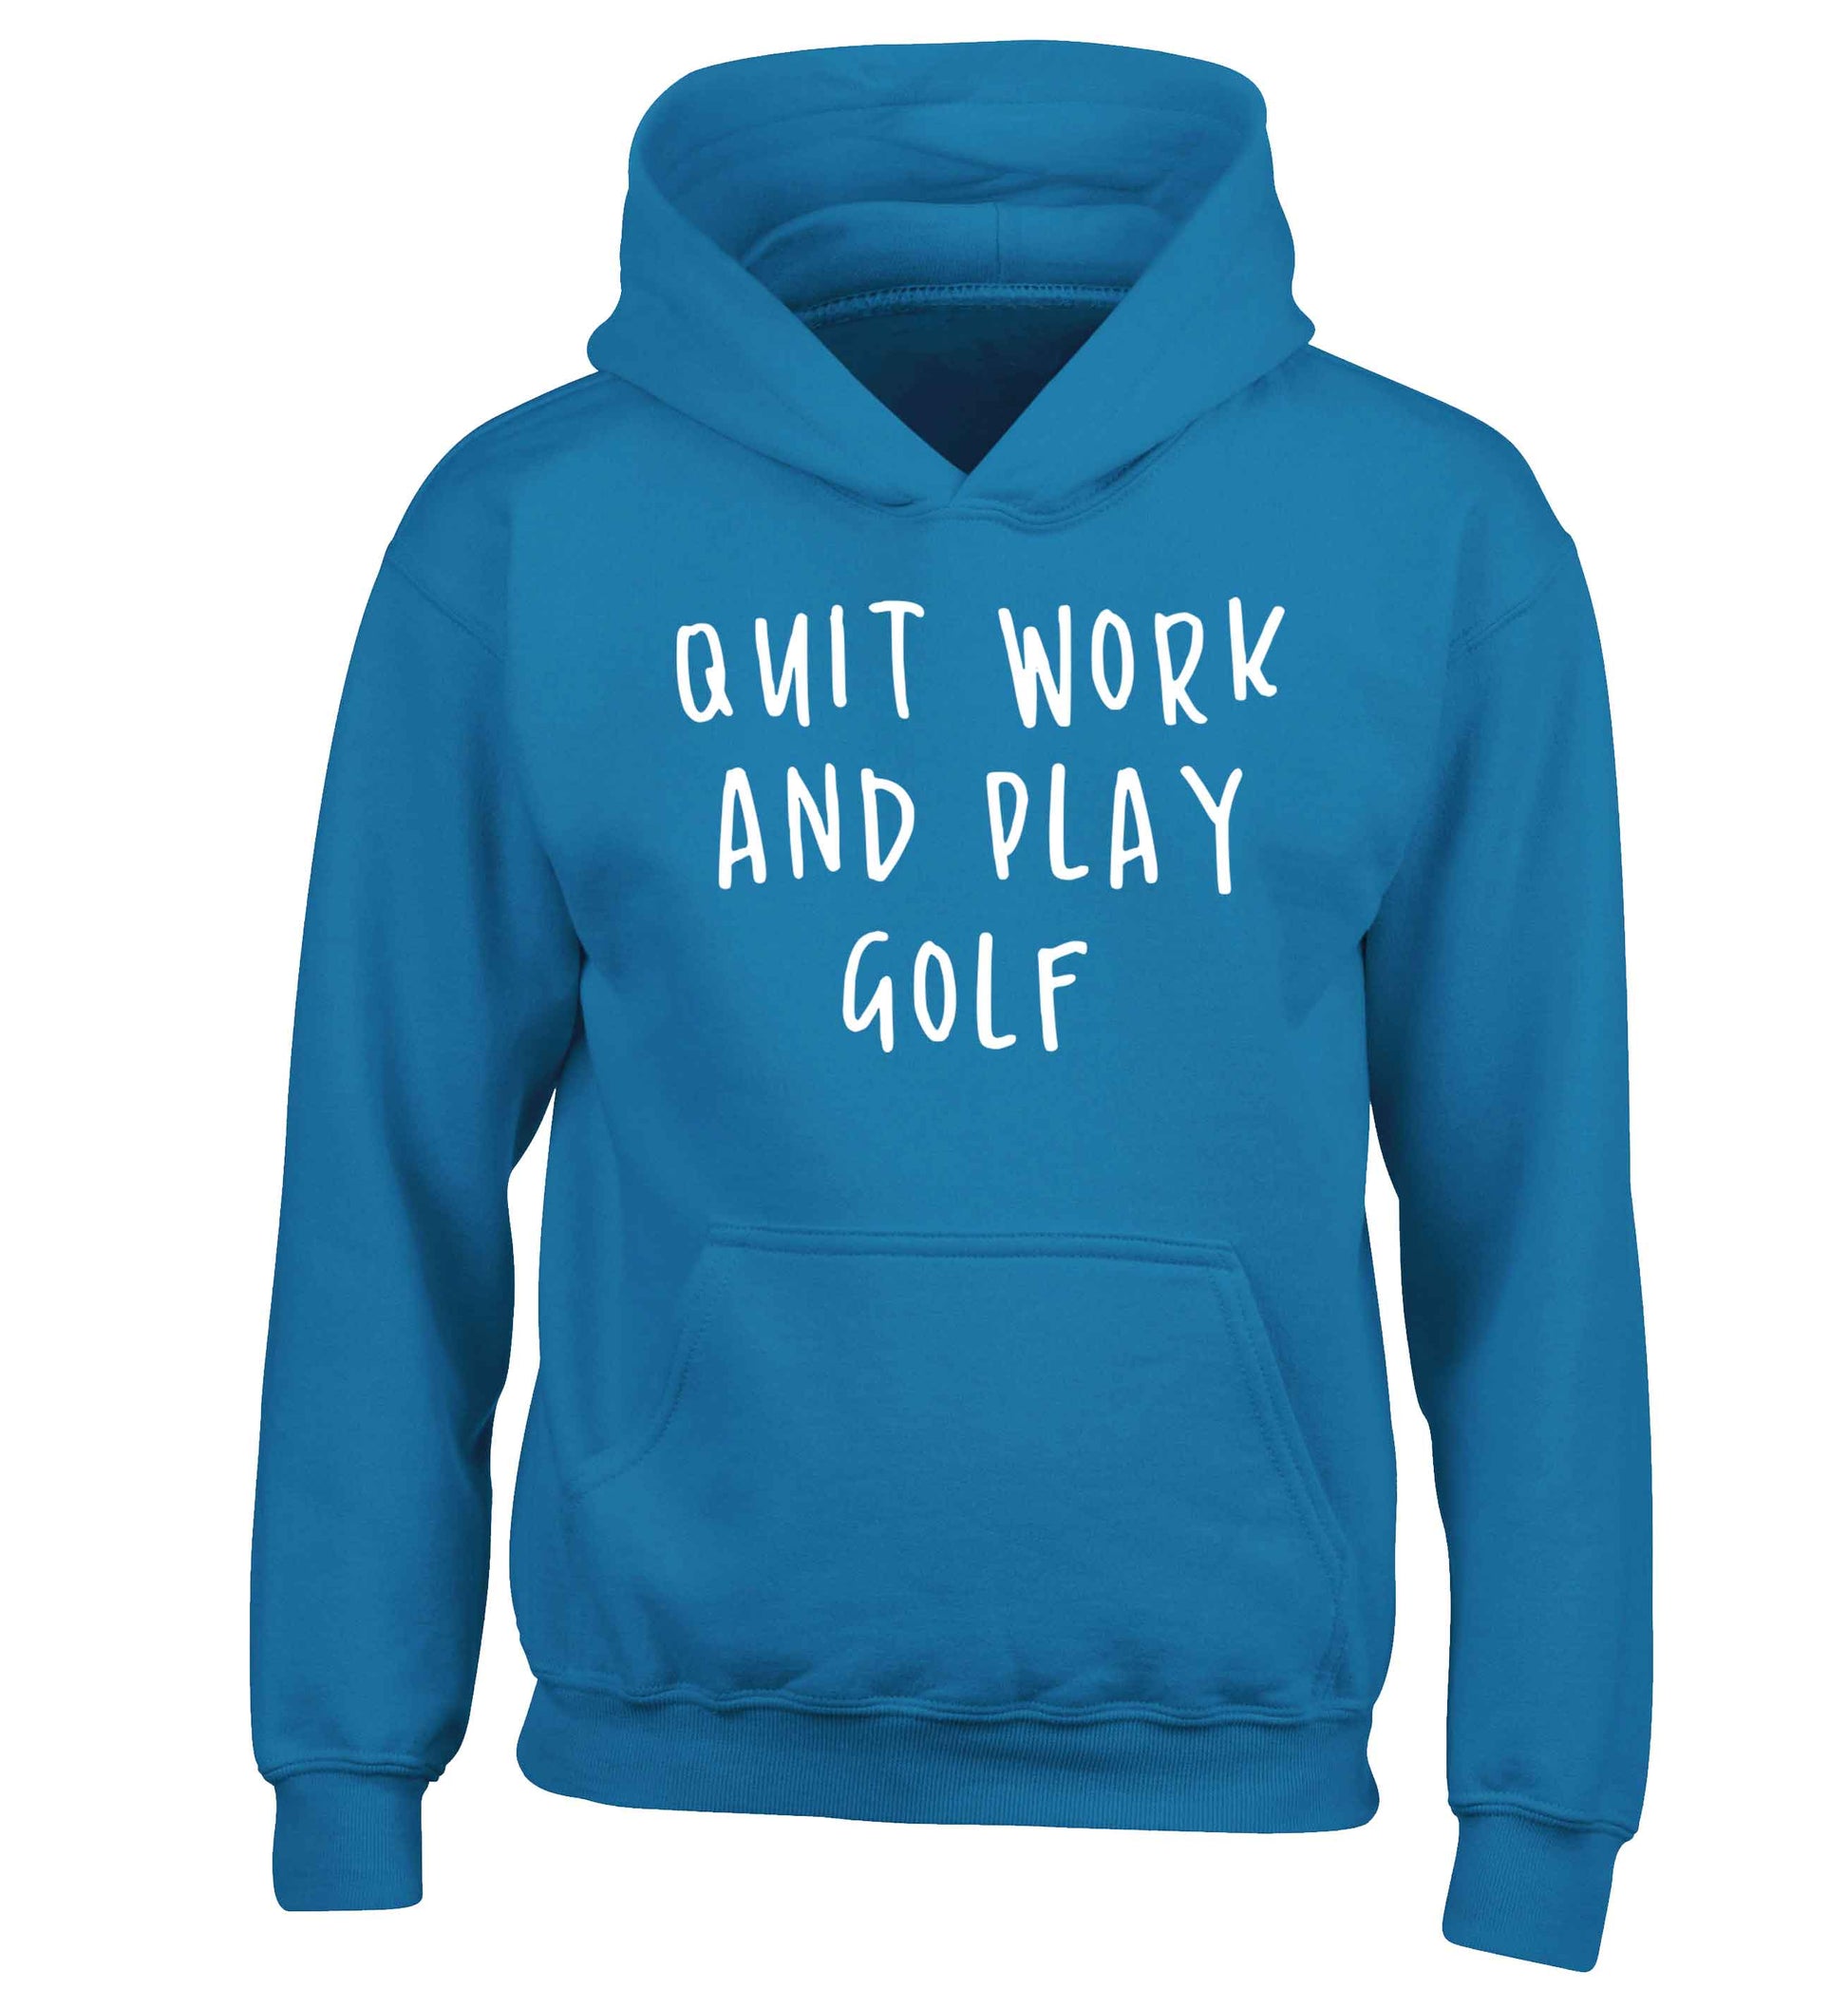 Quit work and play golf children's blue hoodie 12-13 Years